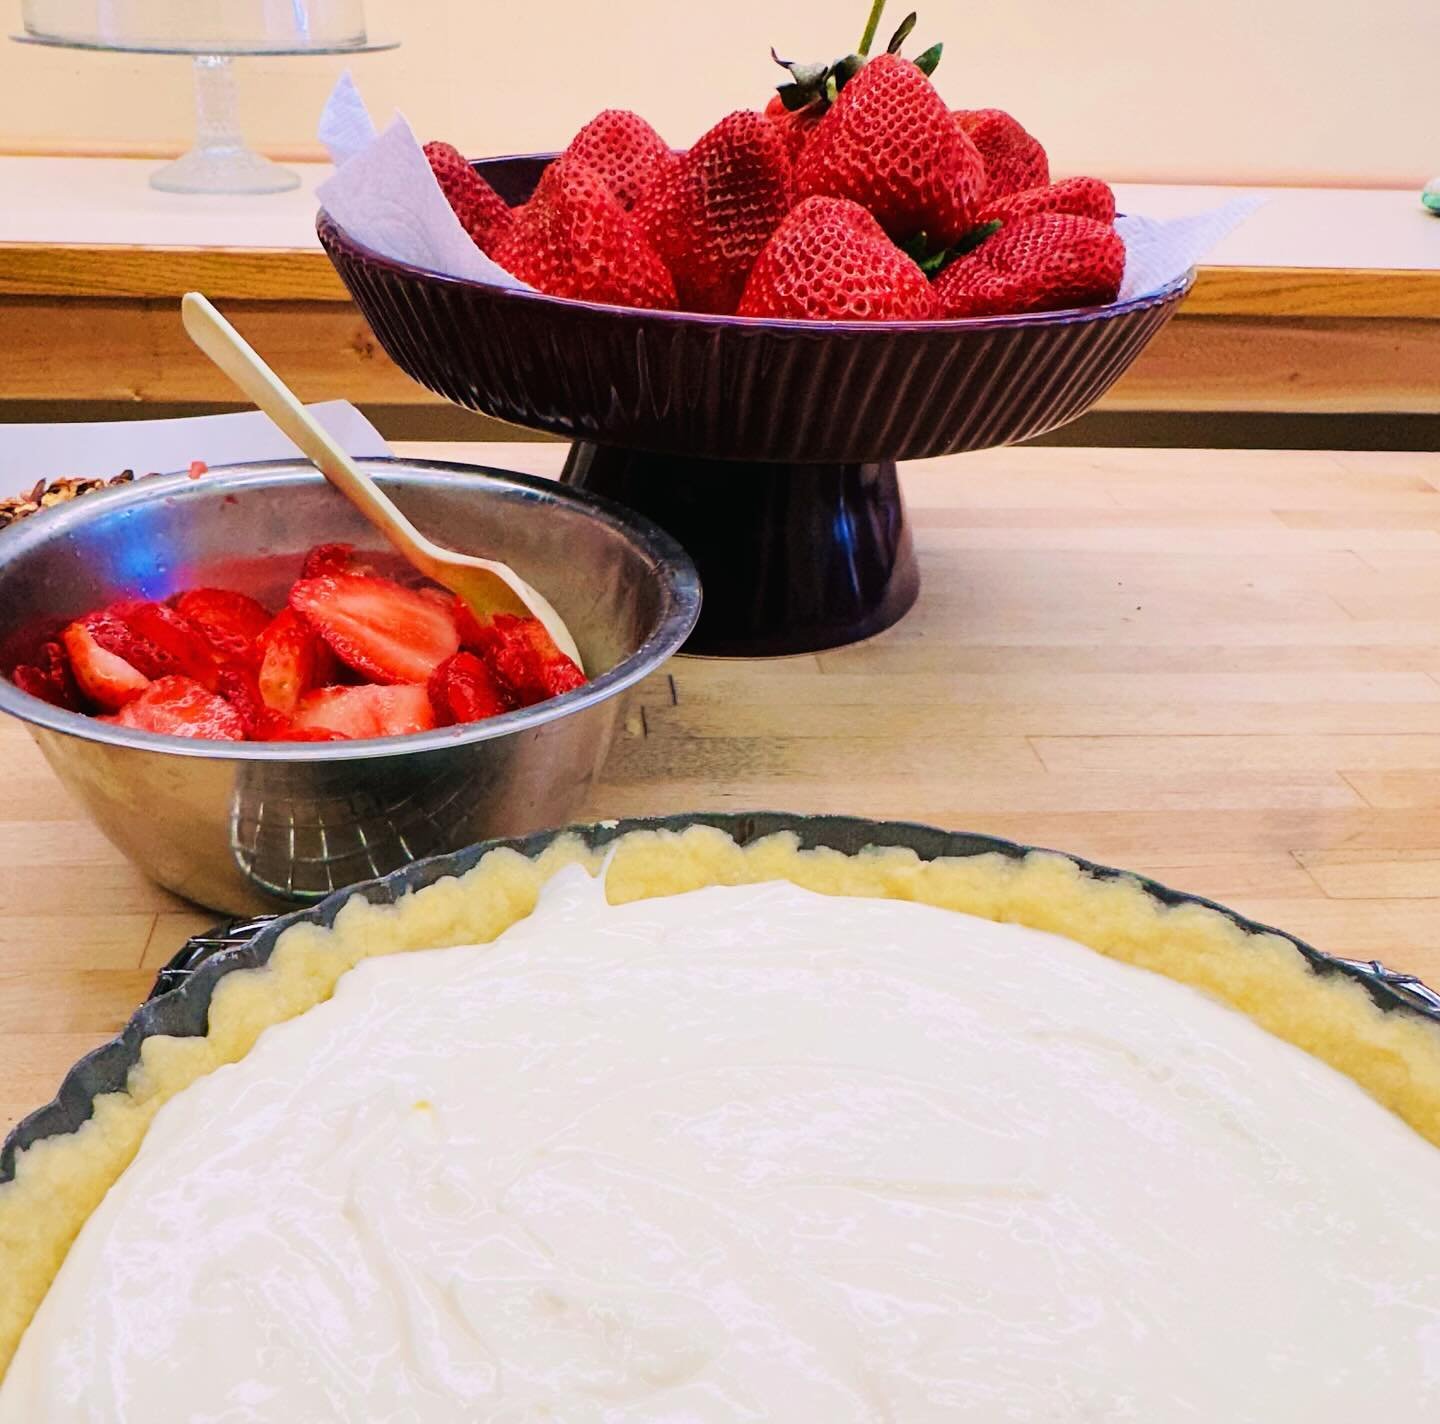 First Tart of the season going in!
Fromage Blanc (Cypress Grove) via @oregoncheesecave with sweet sweet organic strawberries. #summeriscoming #fruittartseason #goatcheese #progoat #cypressgrove #organicstrawberries🍓